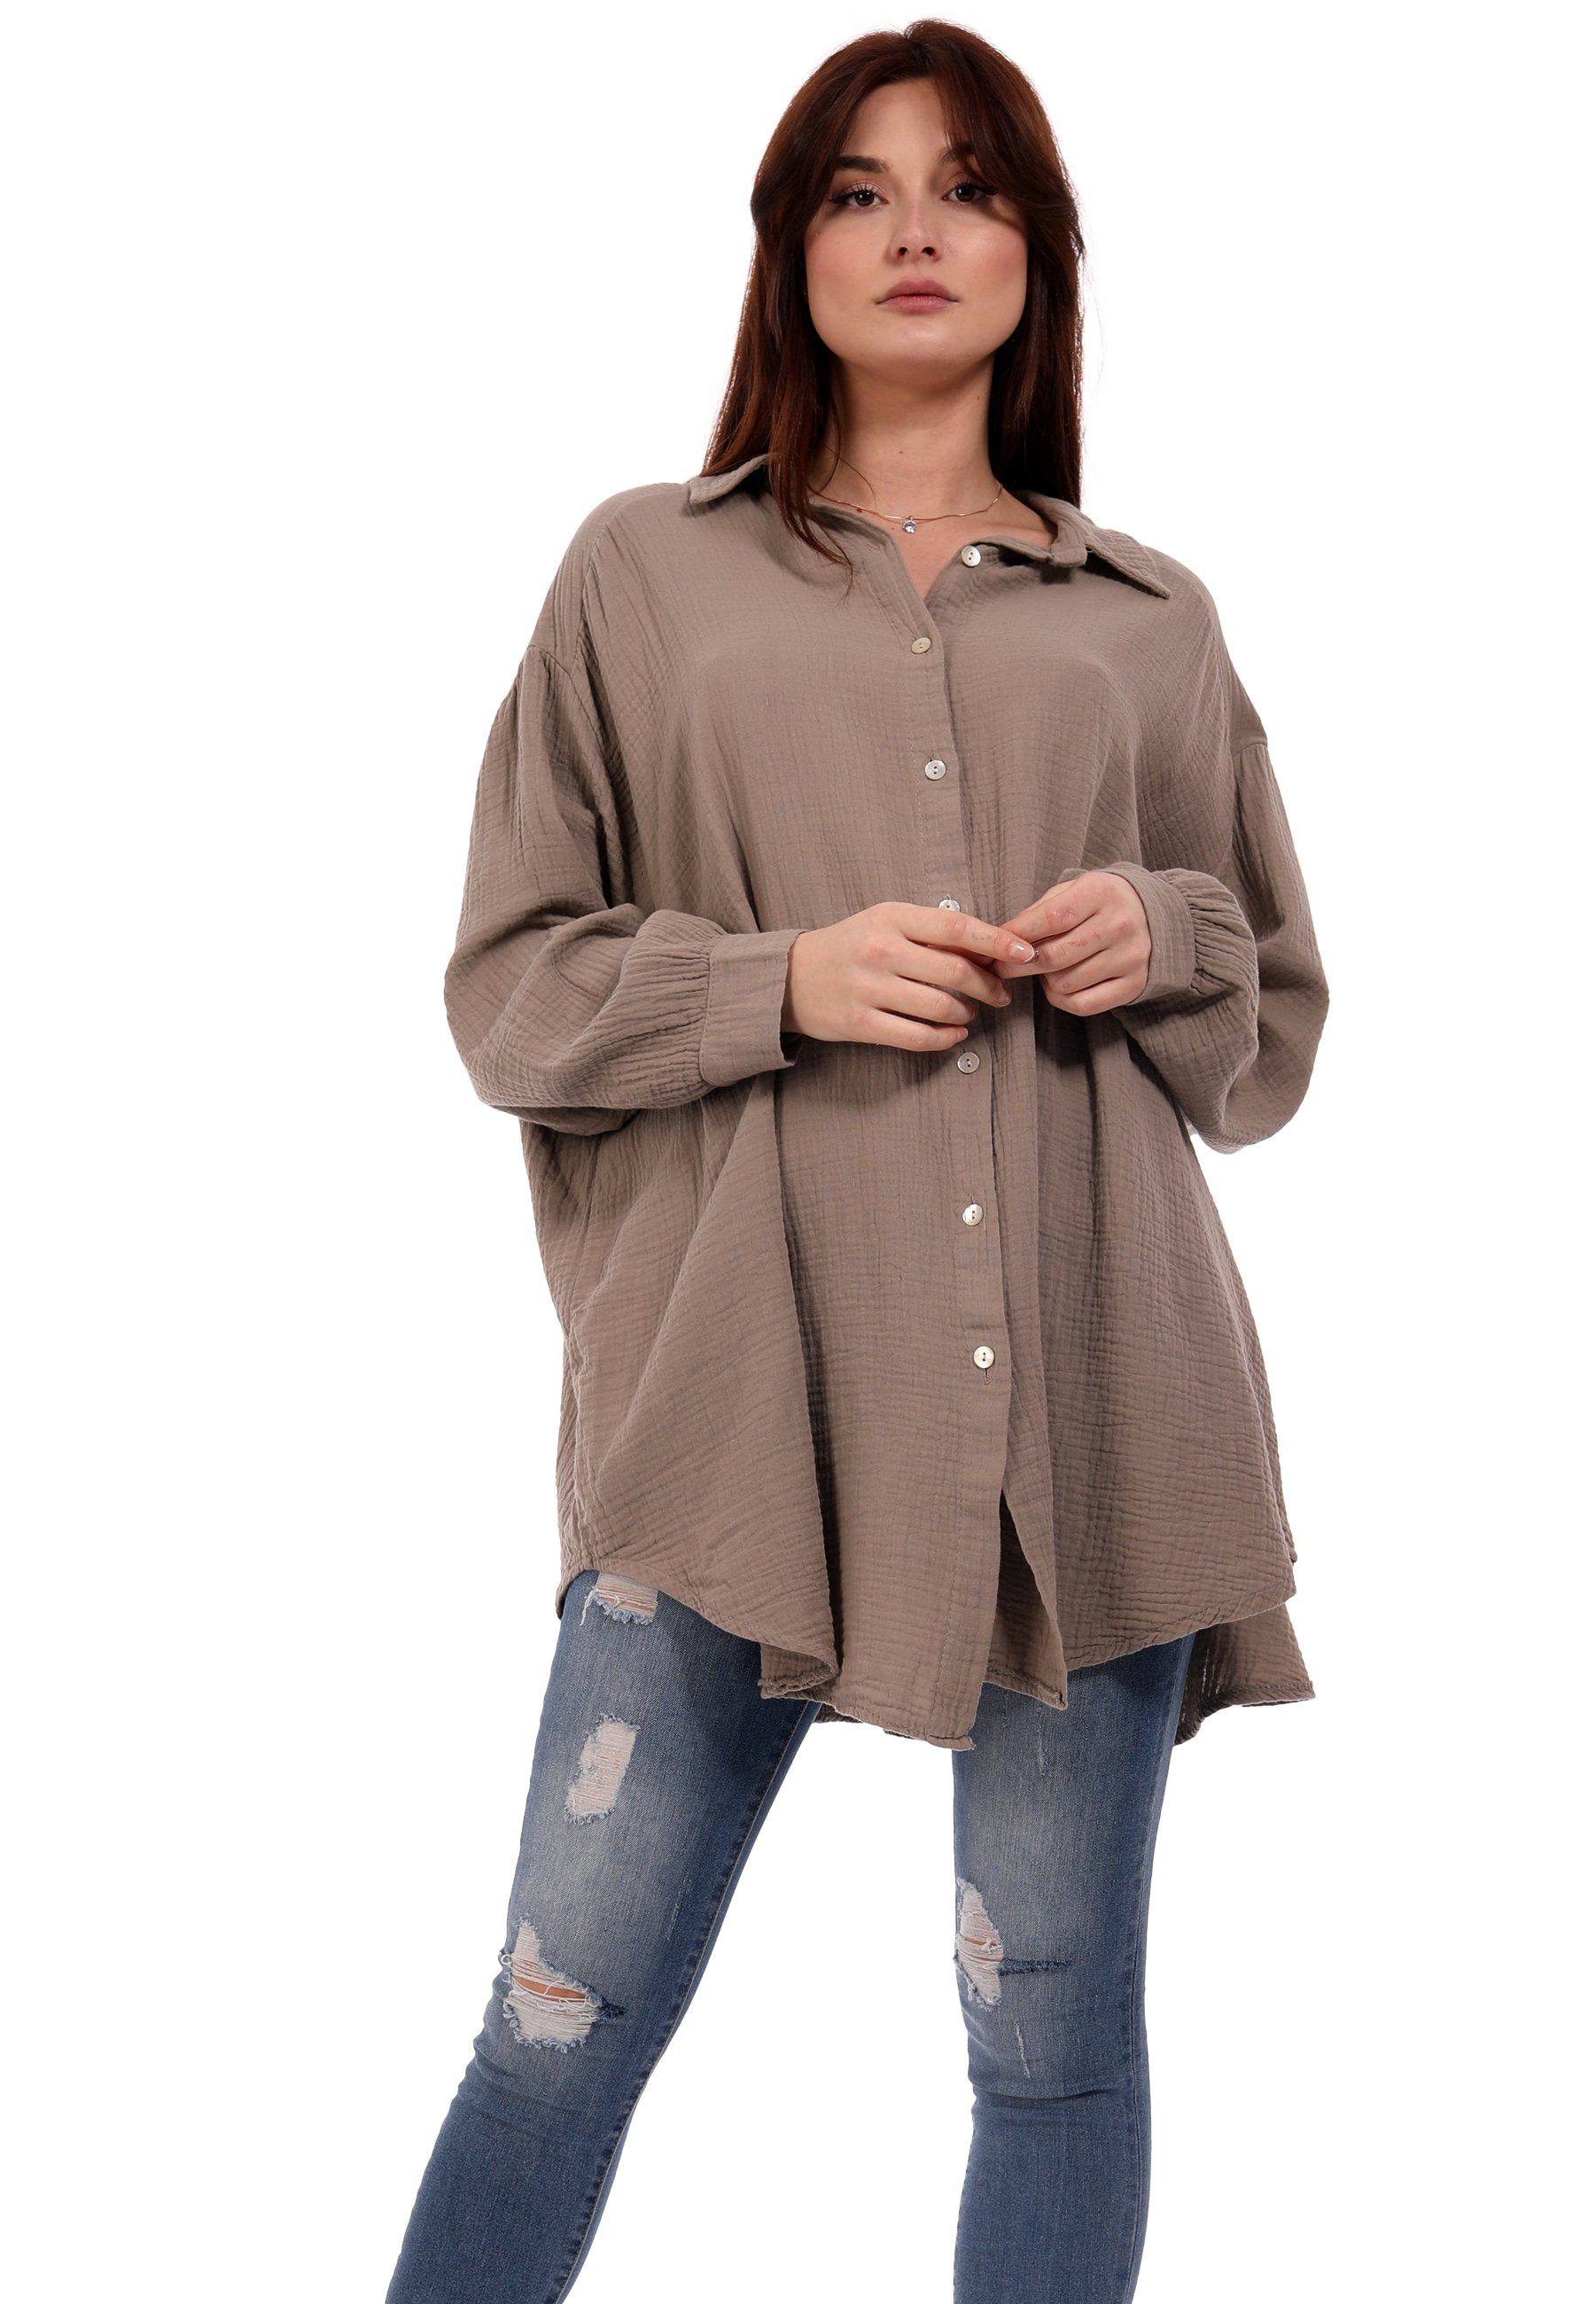 YC Fashion & Style Klassische Bluse »Langarm Bluse in Oversize - Form Plus  Size Loose-Fit Longbluse Musselinstoff in vielen Farben One Size« (1-tlg)  Uni, Langarm, casual online kaufen | OTTO